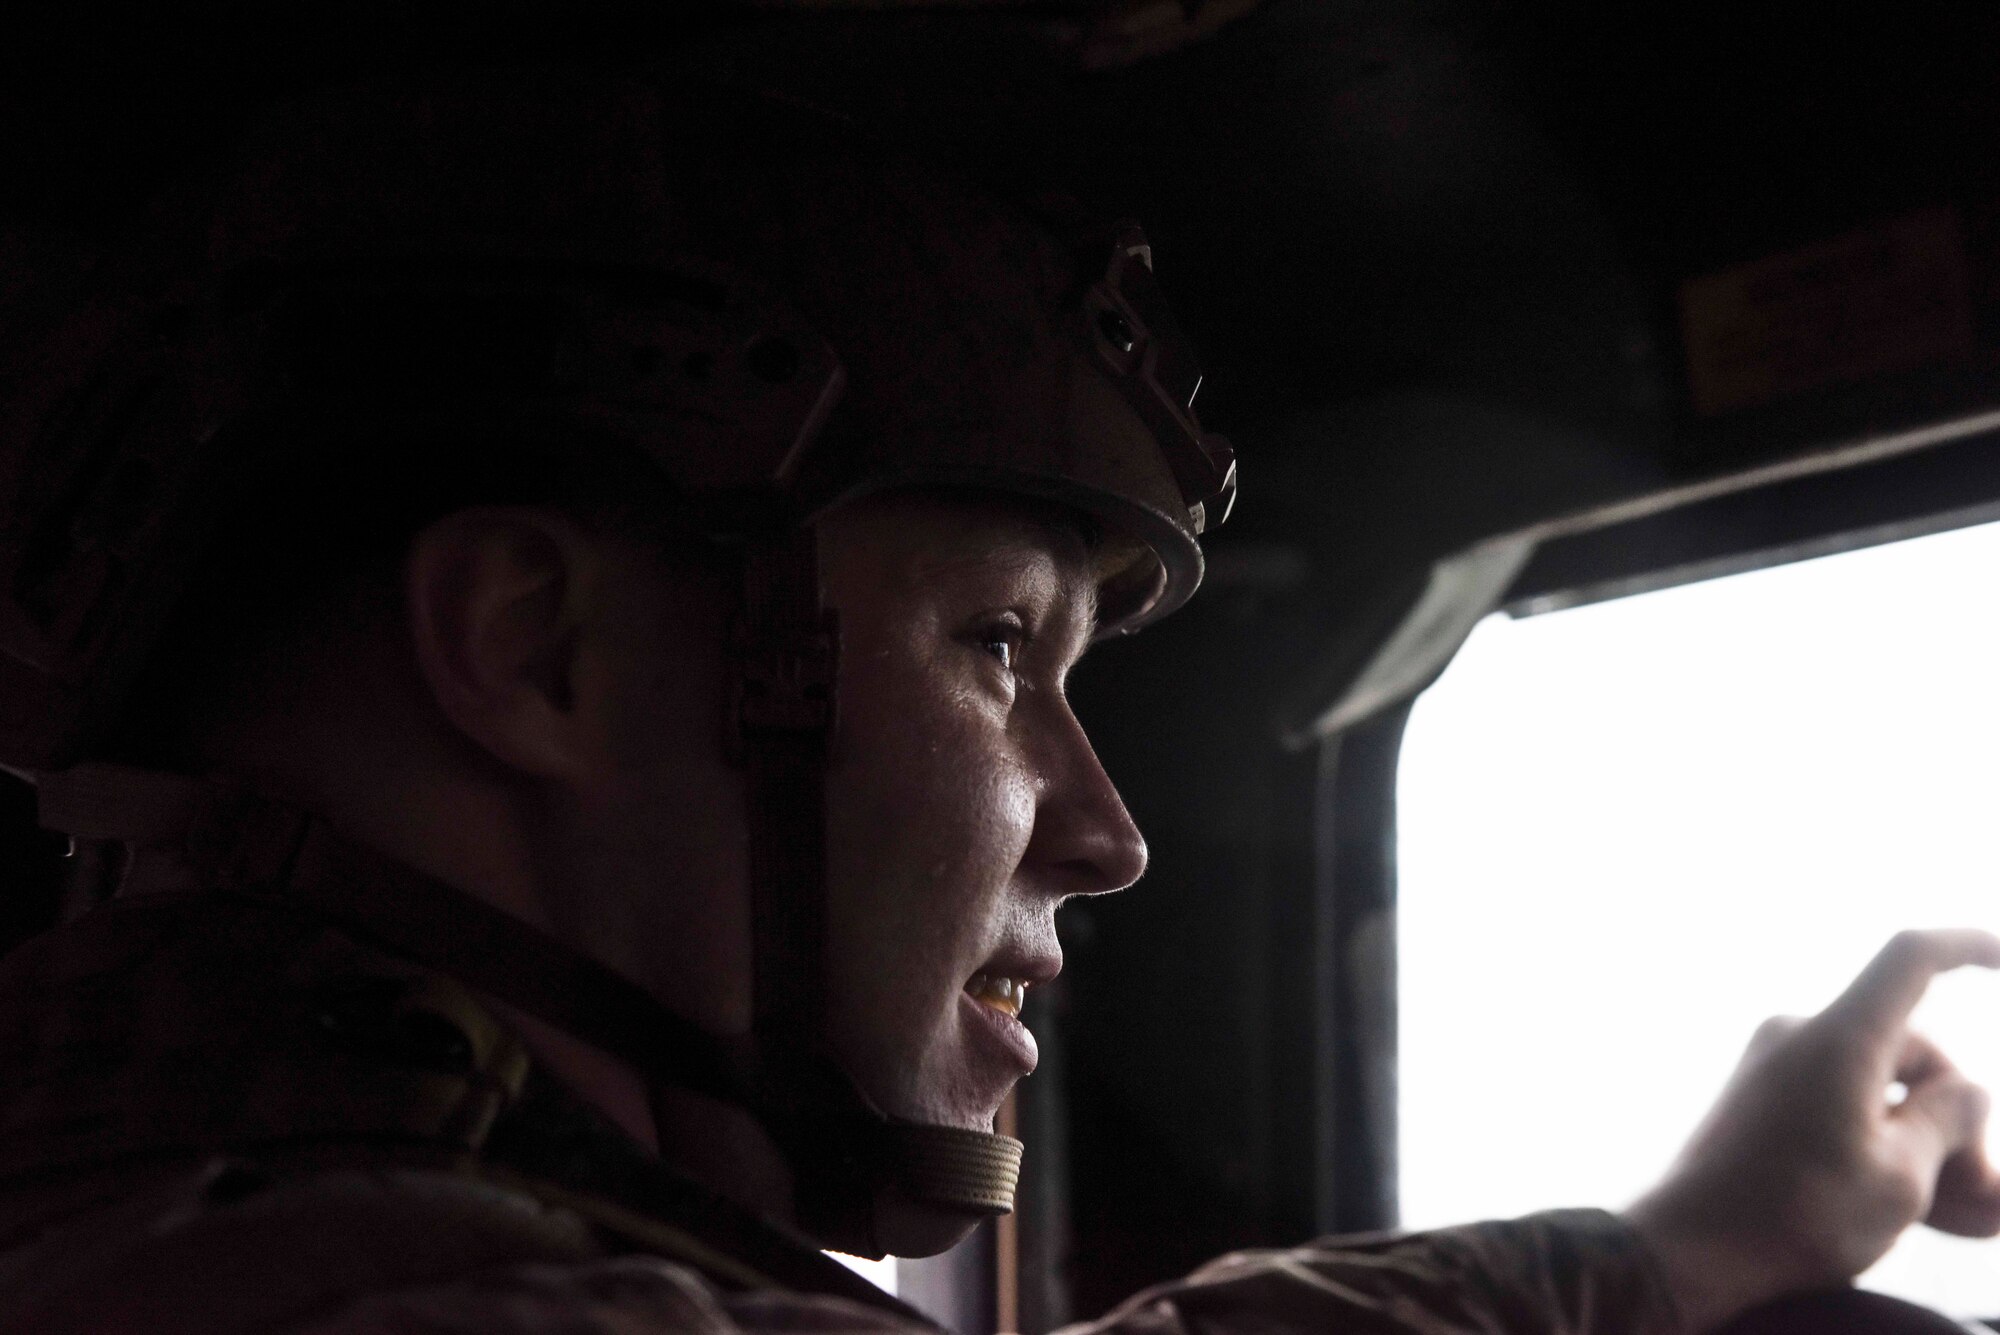 U.S. Air Force Staff Sgt. Layne Jones, 39th Security Forces Squadron unit orientation instructor, drives a Humvee after an exercise Nov. 27, 2019, at Incirlik Air Base, Turkey. The 39th SFS conducts frequent no-notice exercises in order to enhance the mission readiness of its Airmen. (U.S. Air Force photo by Staff Sgt. Joshua Magbanua)